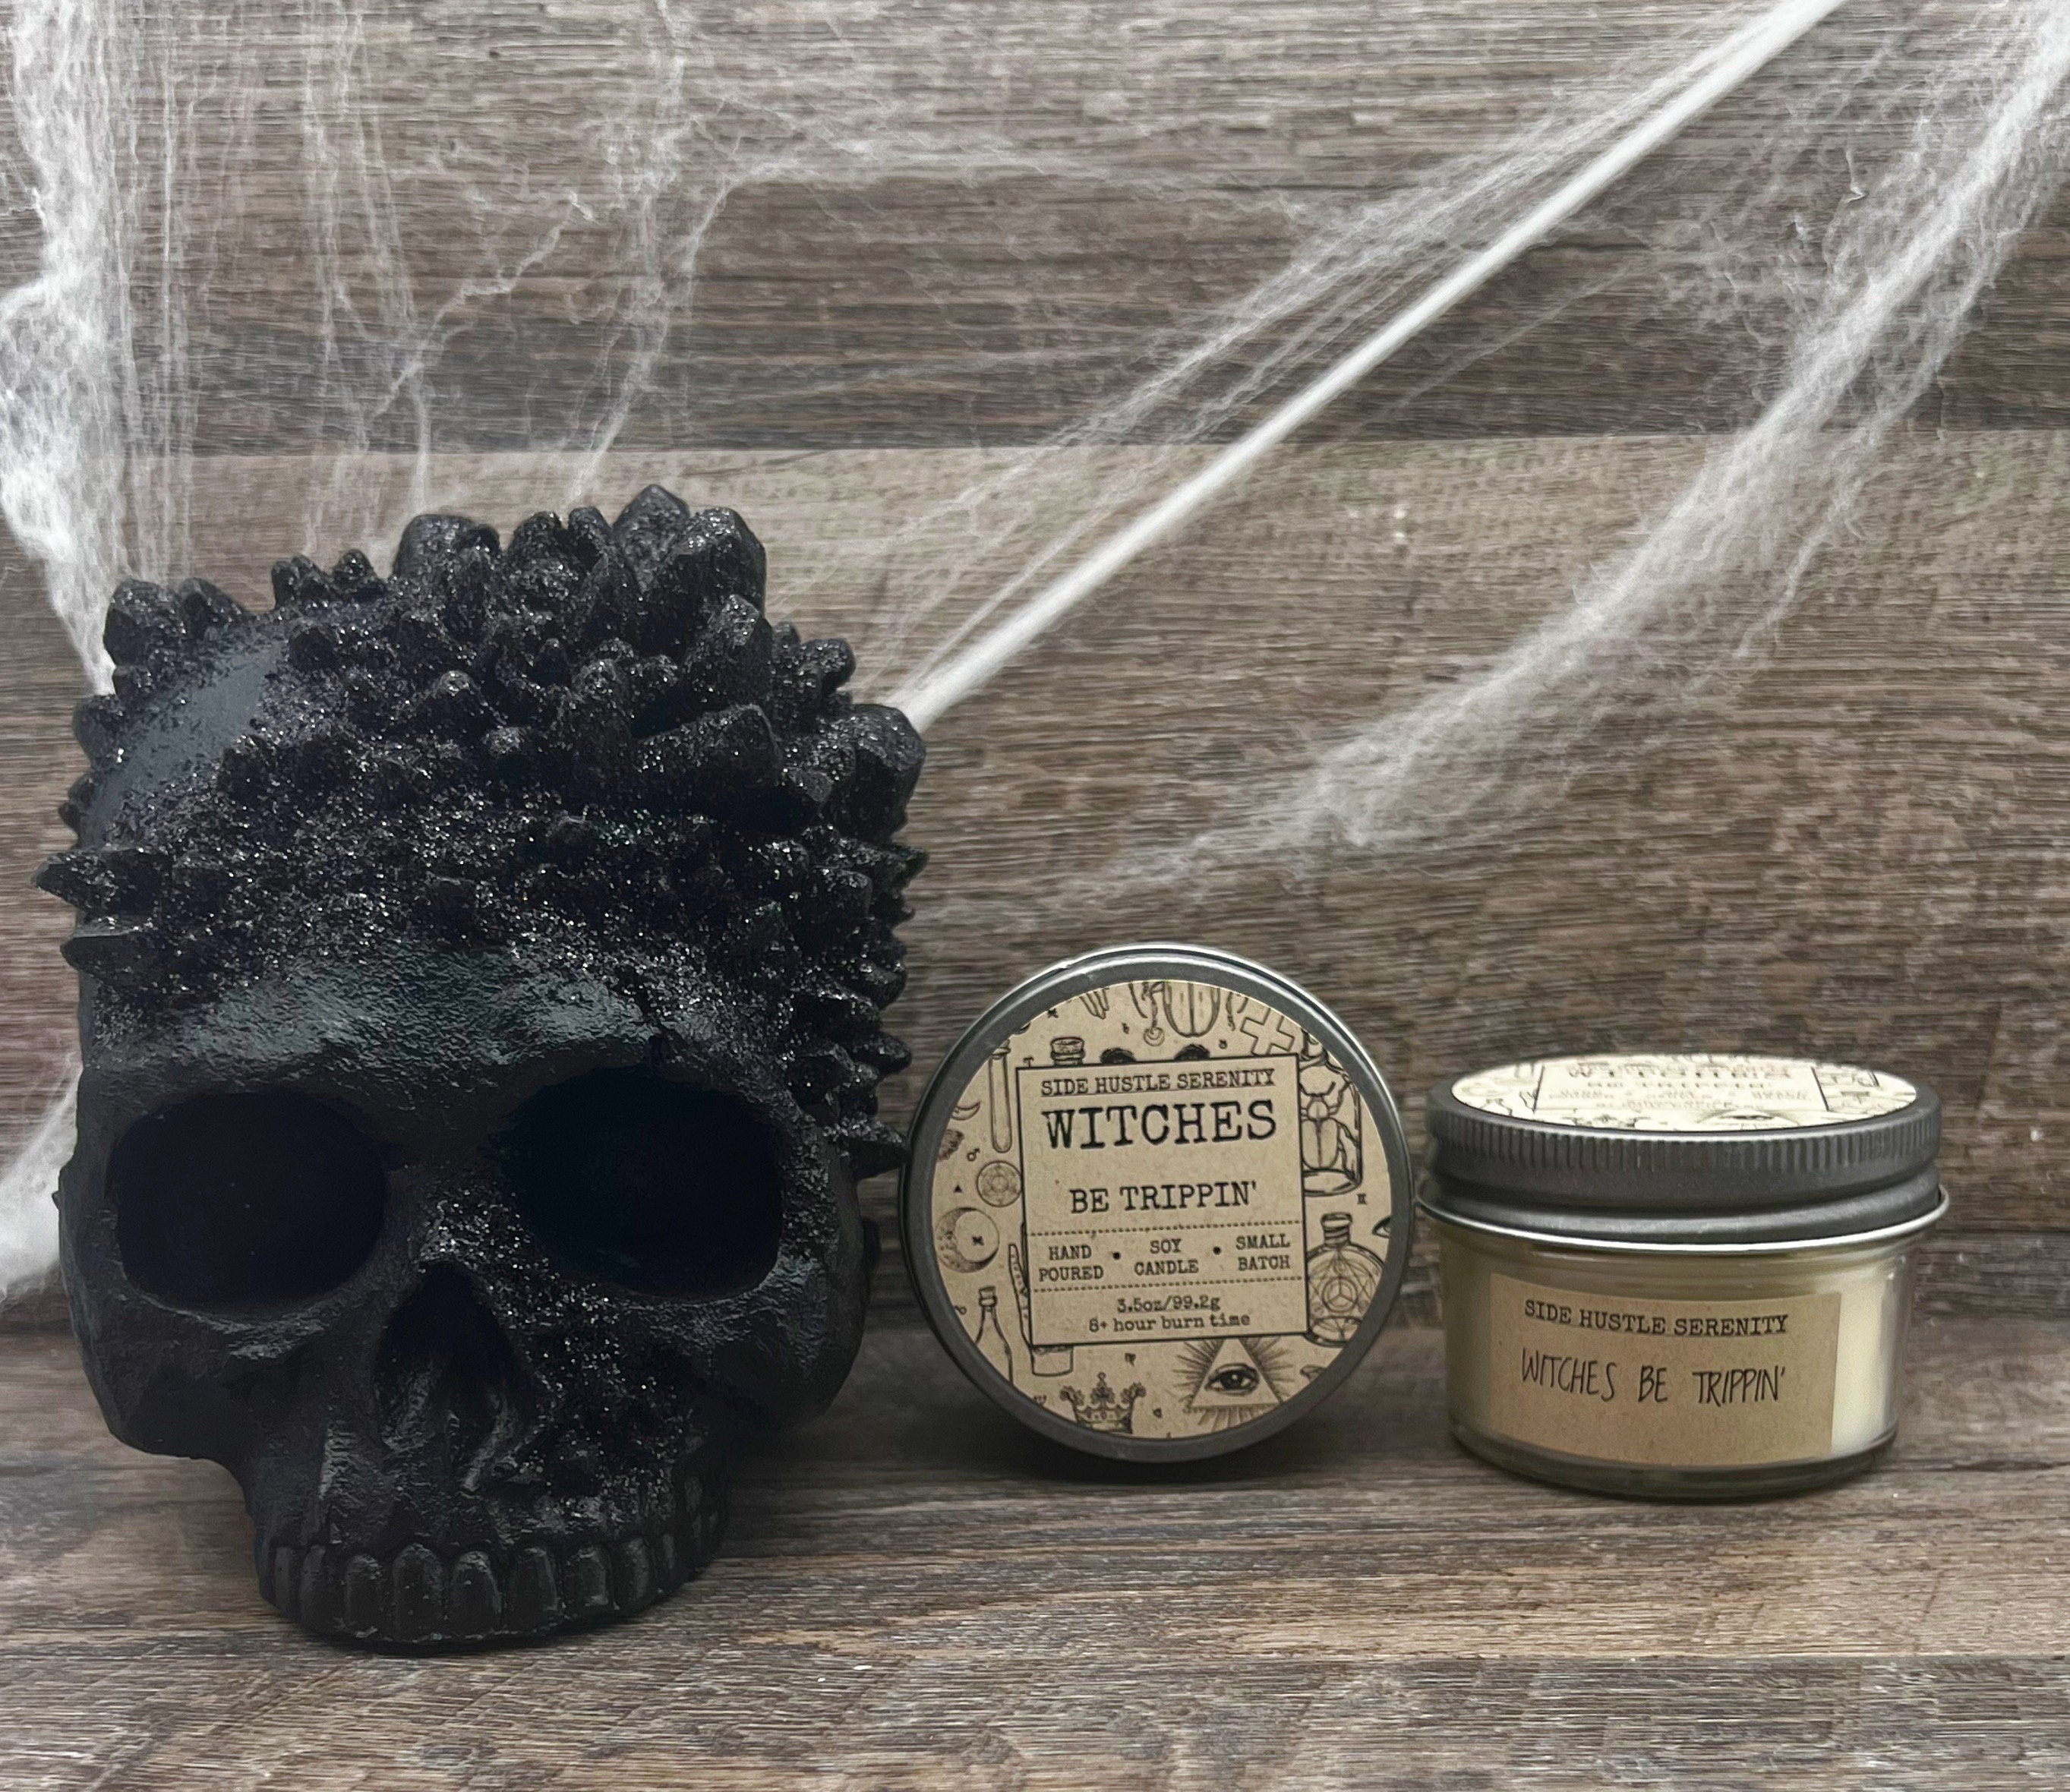 WITCHES BE TRIPPIN' |  Blackberry Rose Scented | 3.5oz Wood Wick Candle | Halloween Humor | Witch Please | Resting Witch Face | Sup Witches